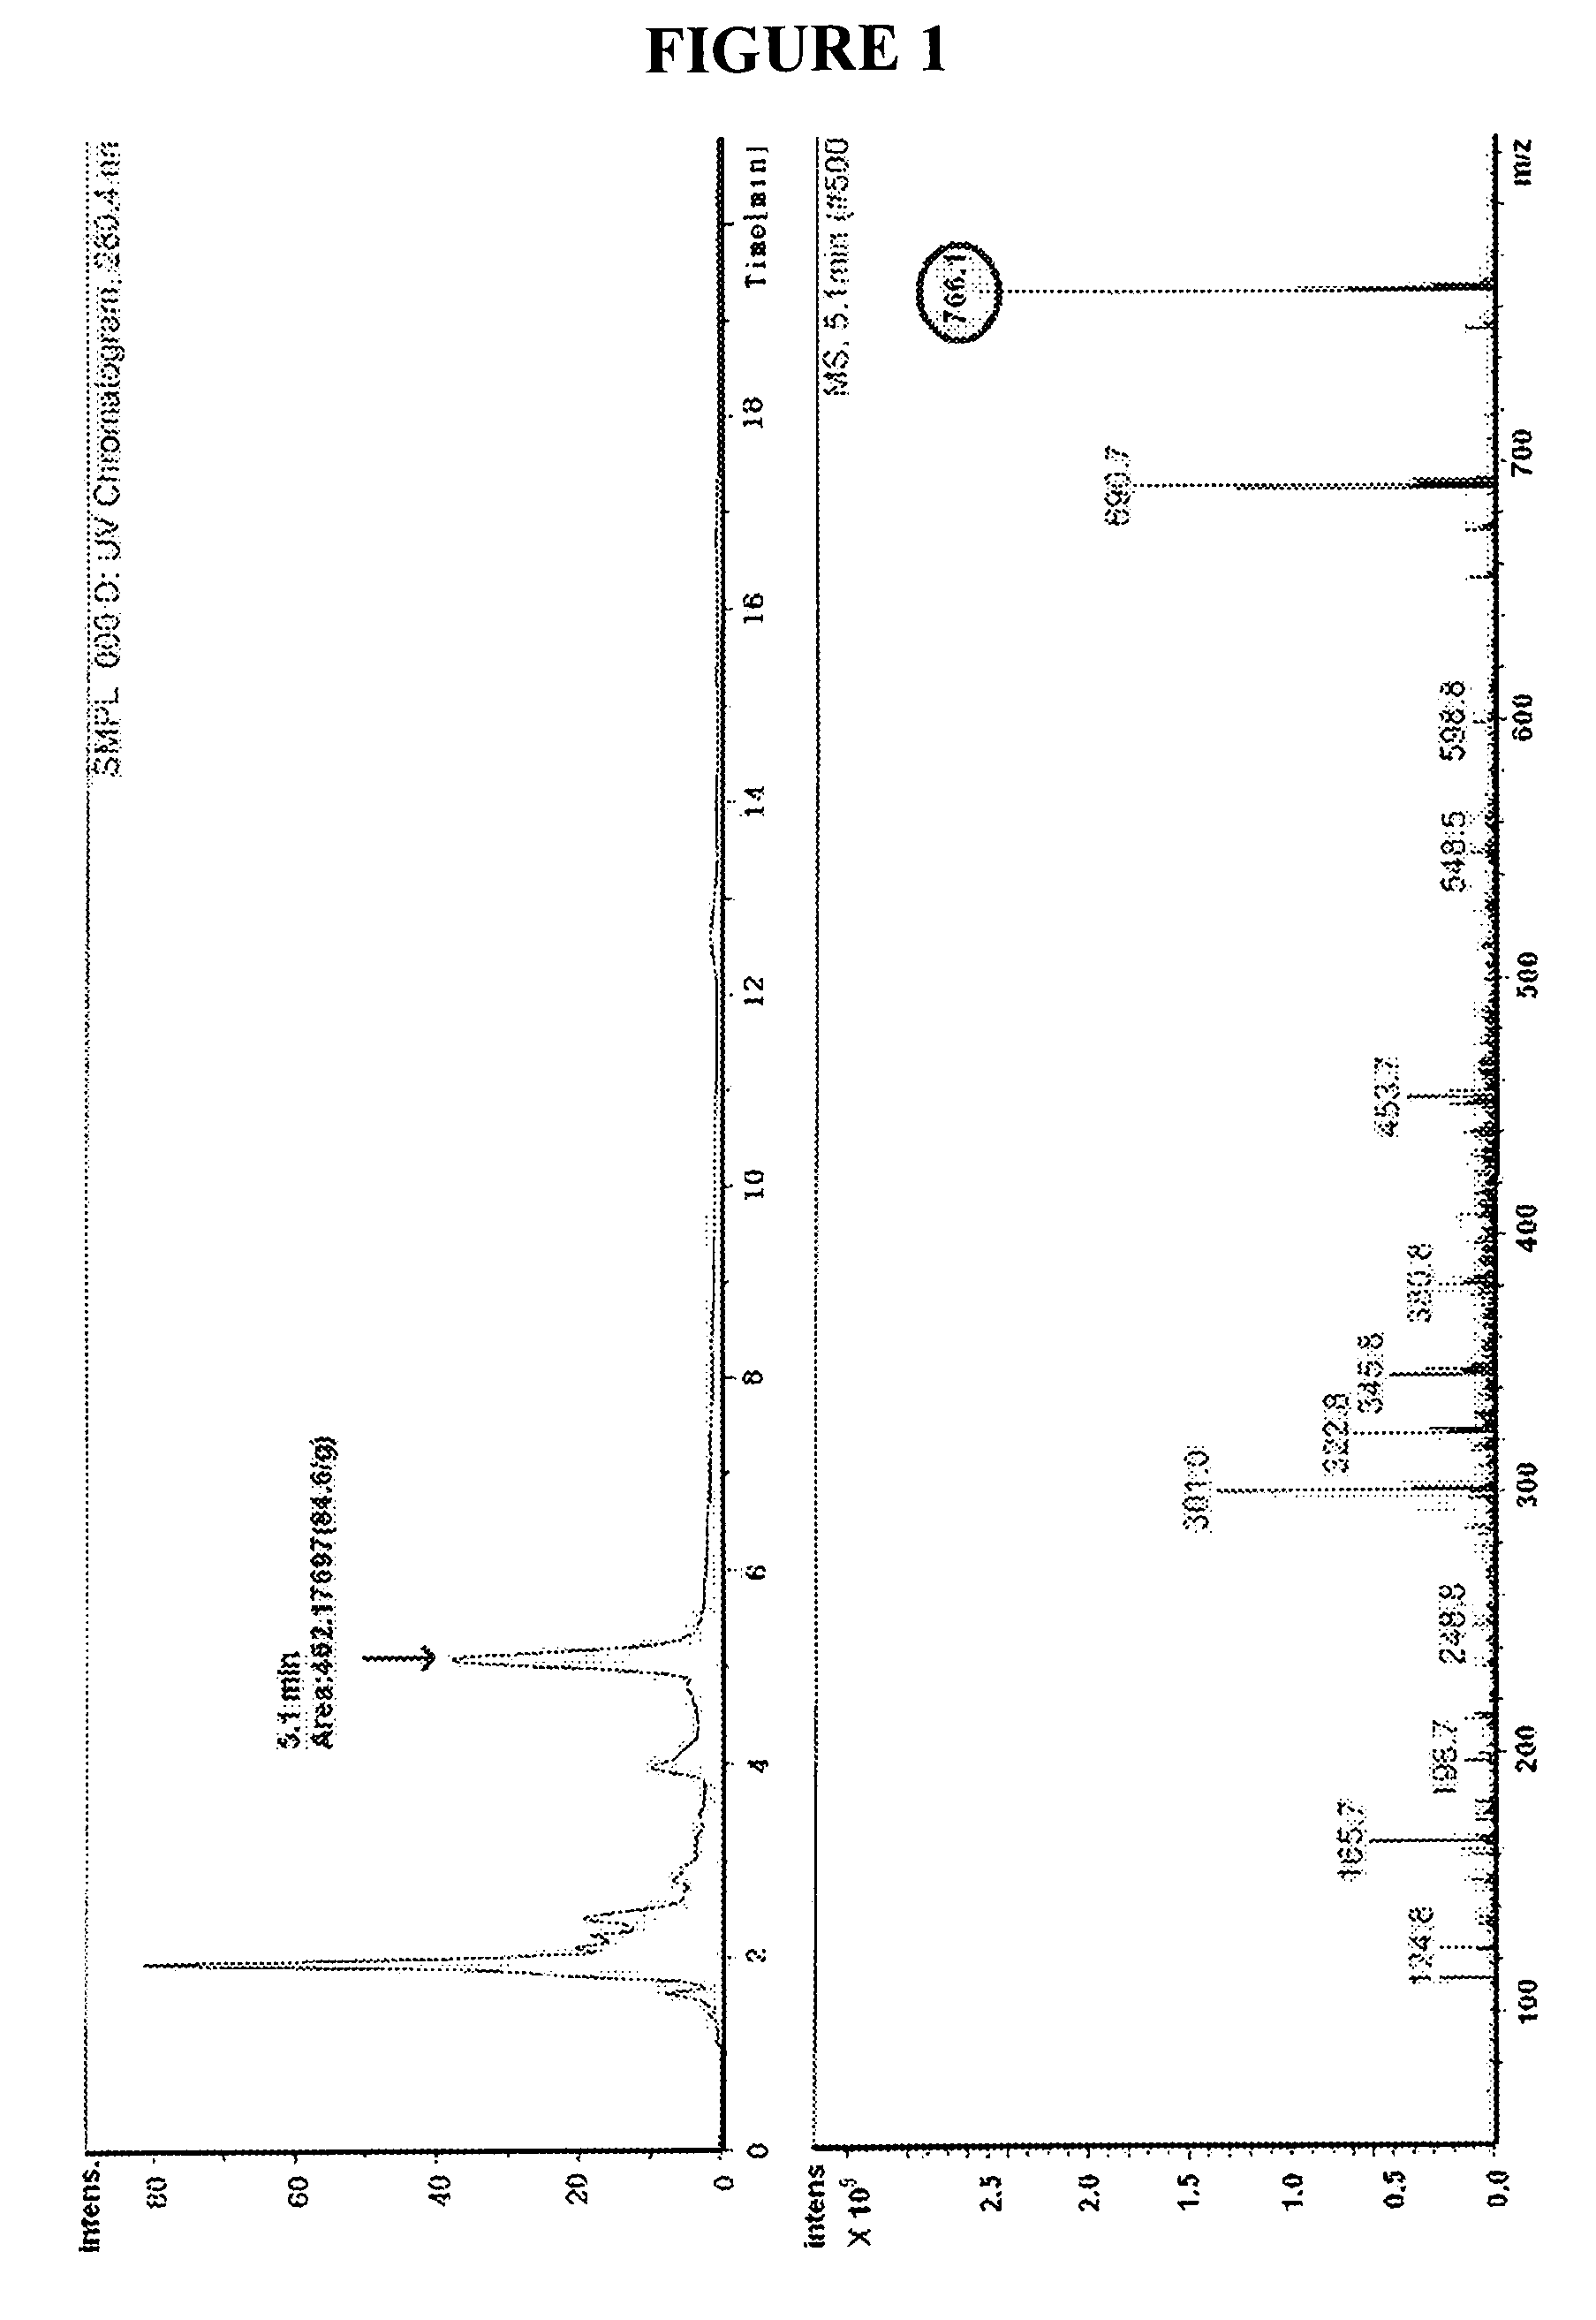 Method for preparing processed ginseng to obtain increased amount of ginsenoside RG5